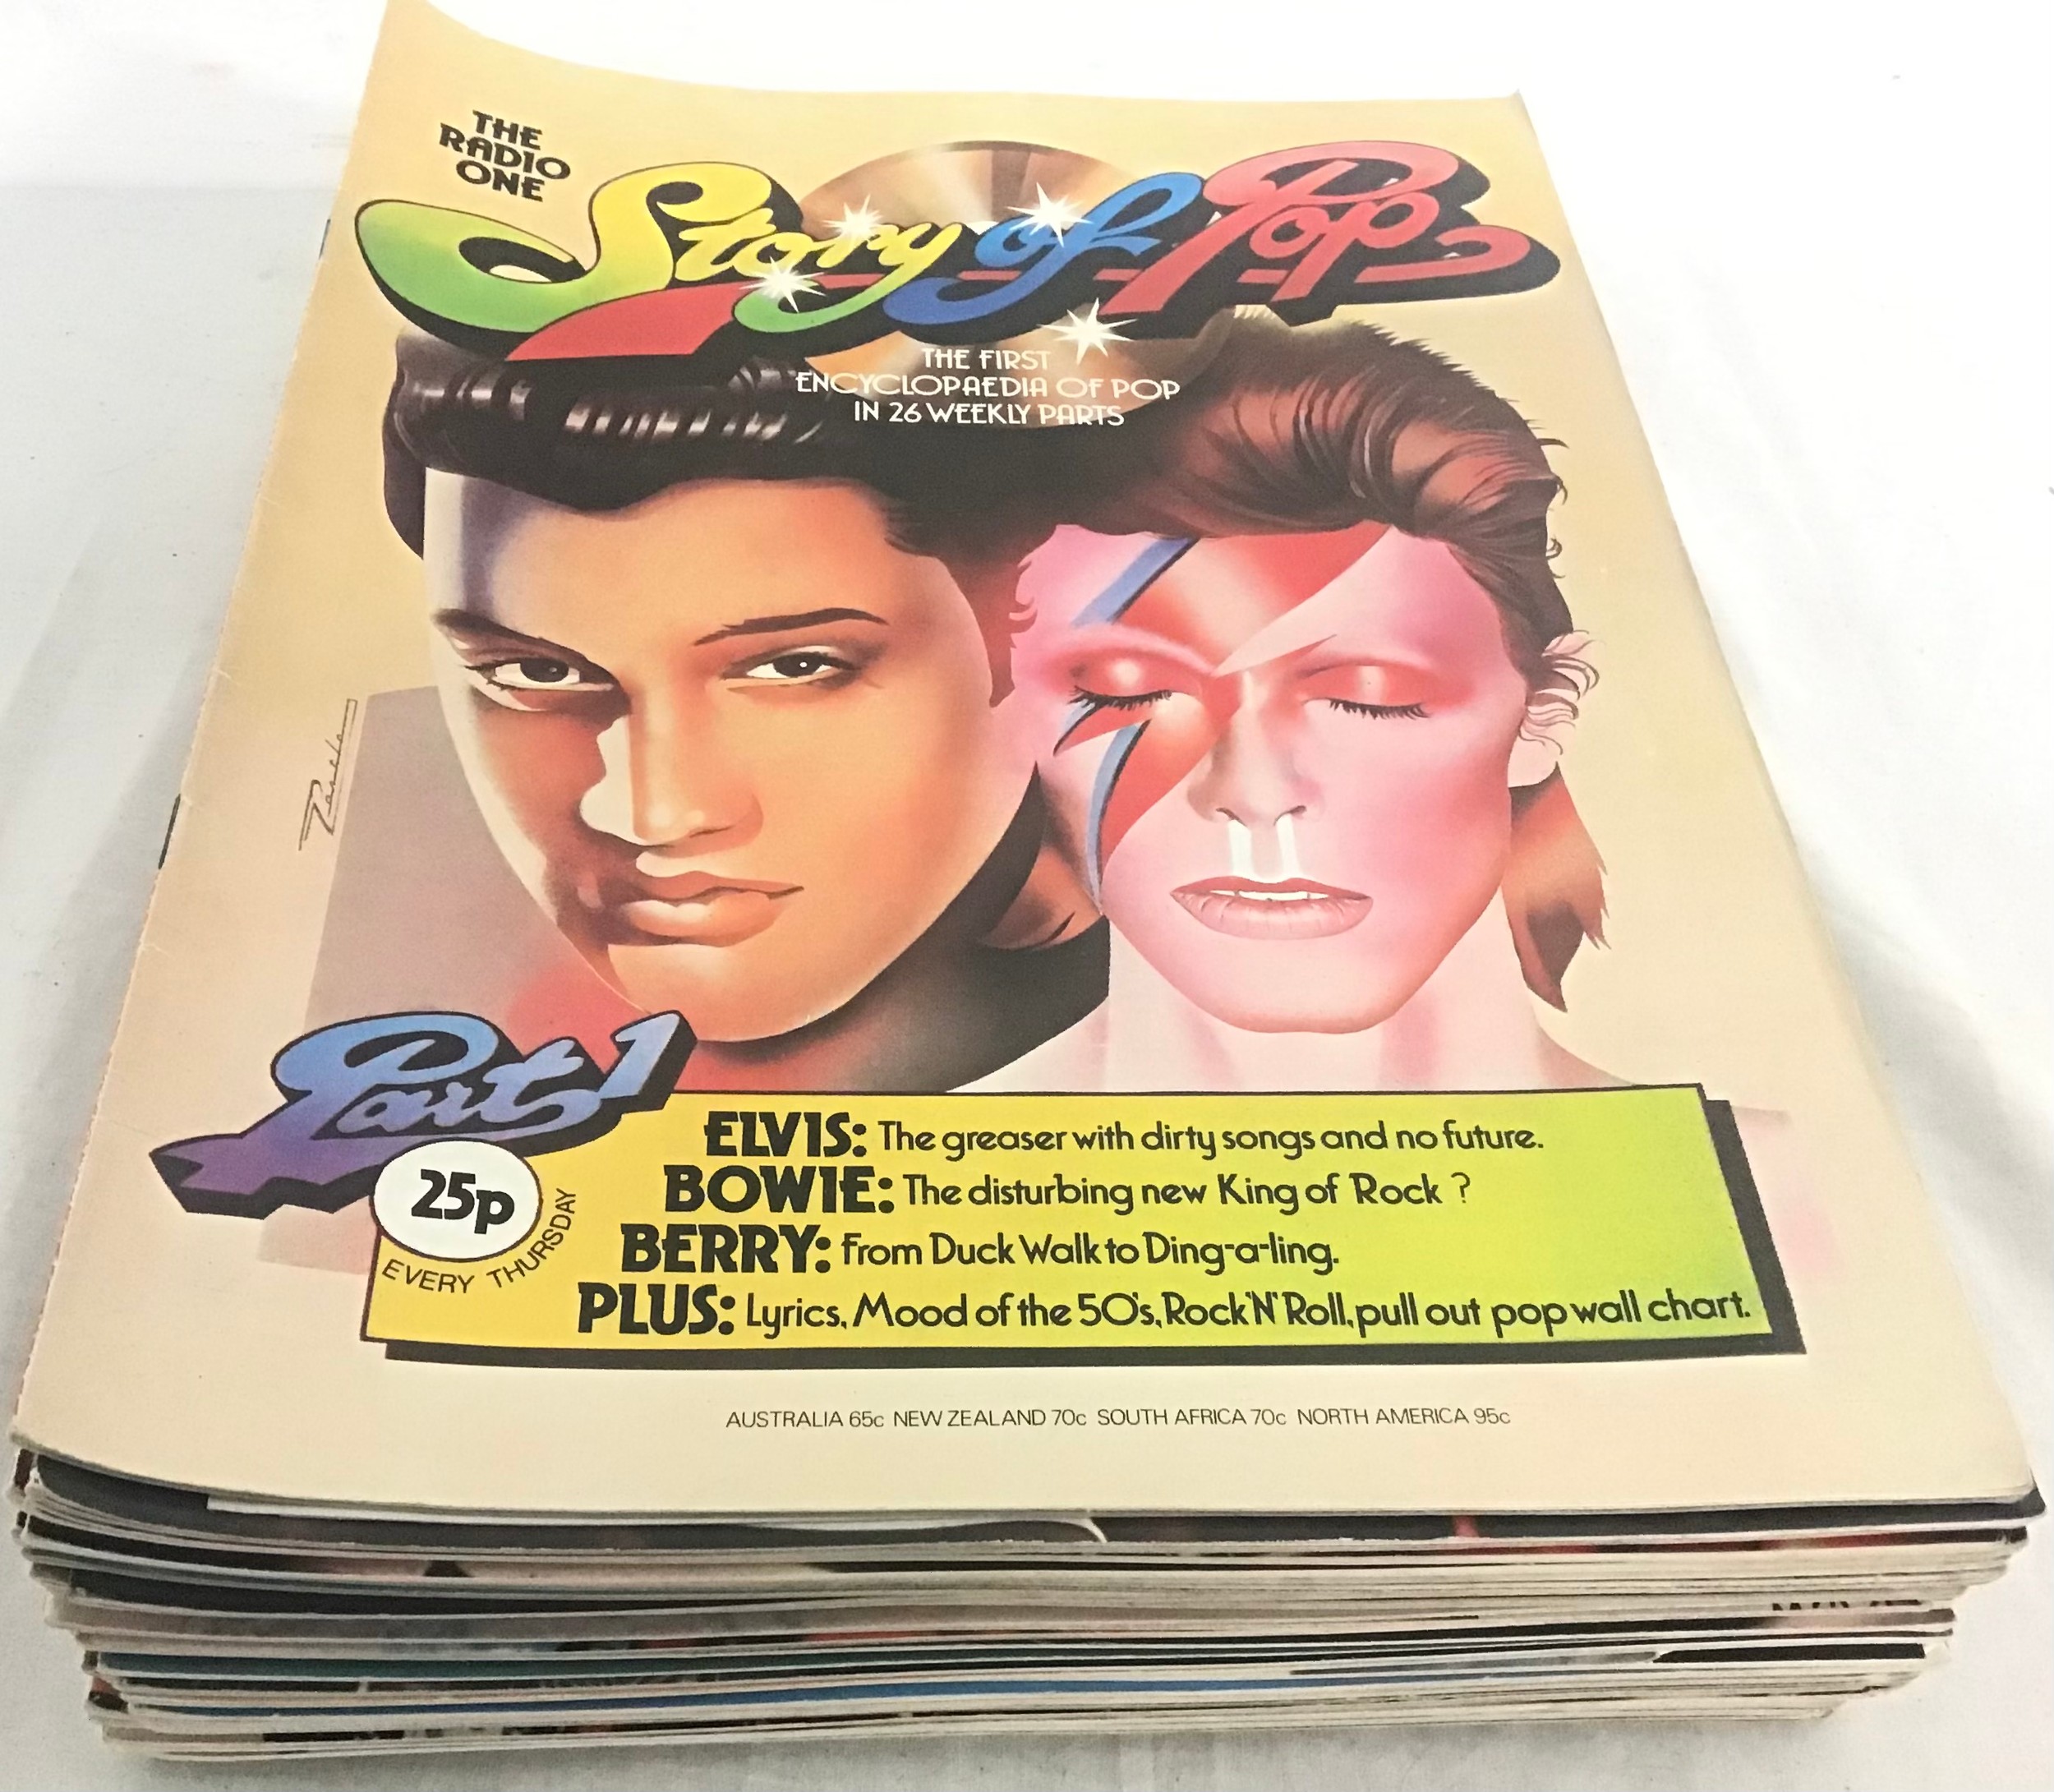 COLLECTION OF ‘STORY OF POP’ MAGAZINES. This is a collection of 1 - 40 magazines but unfortunately